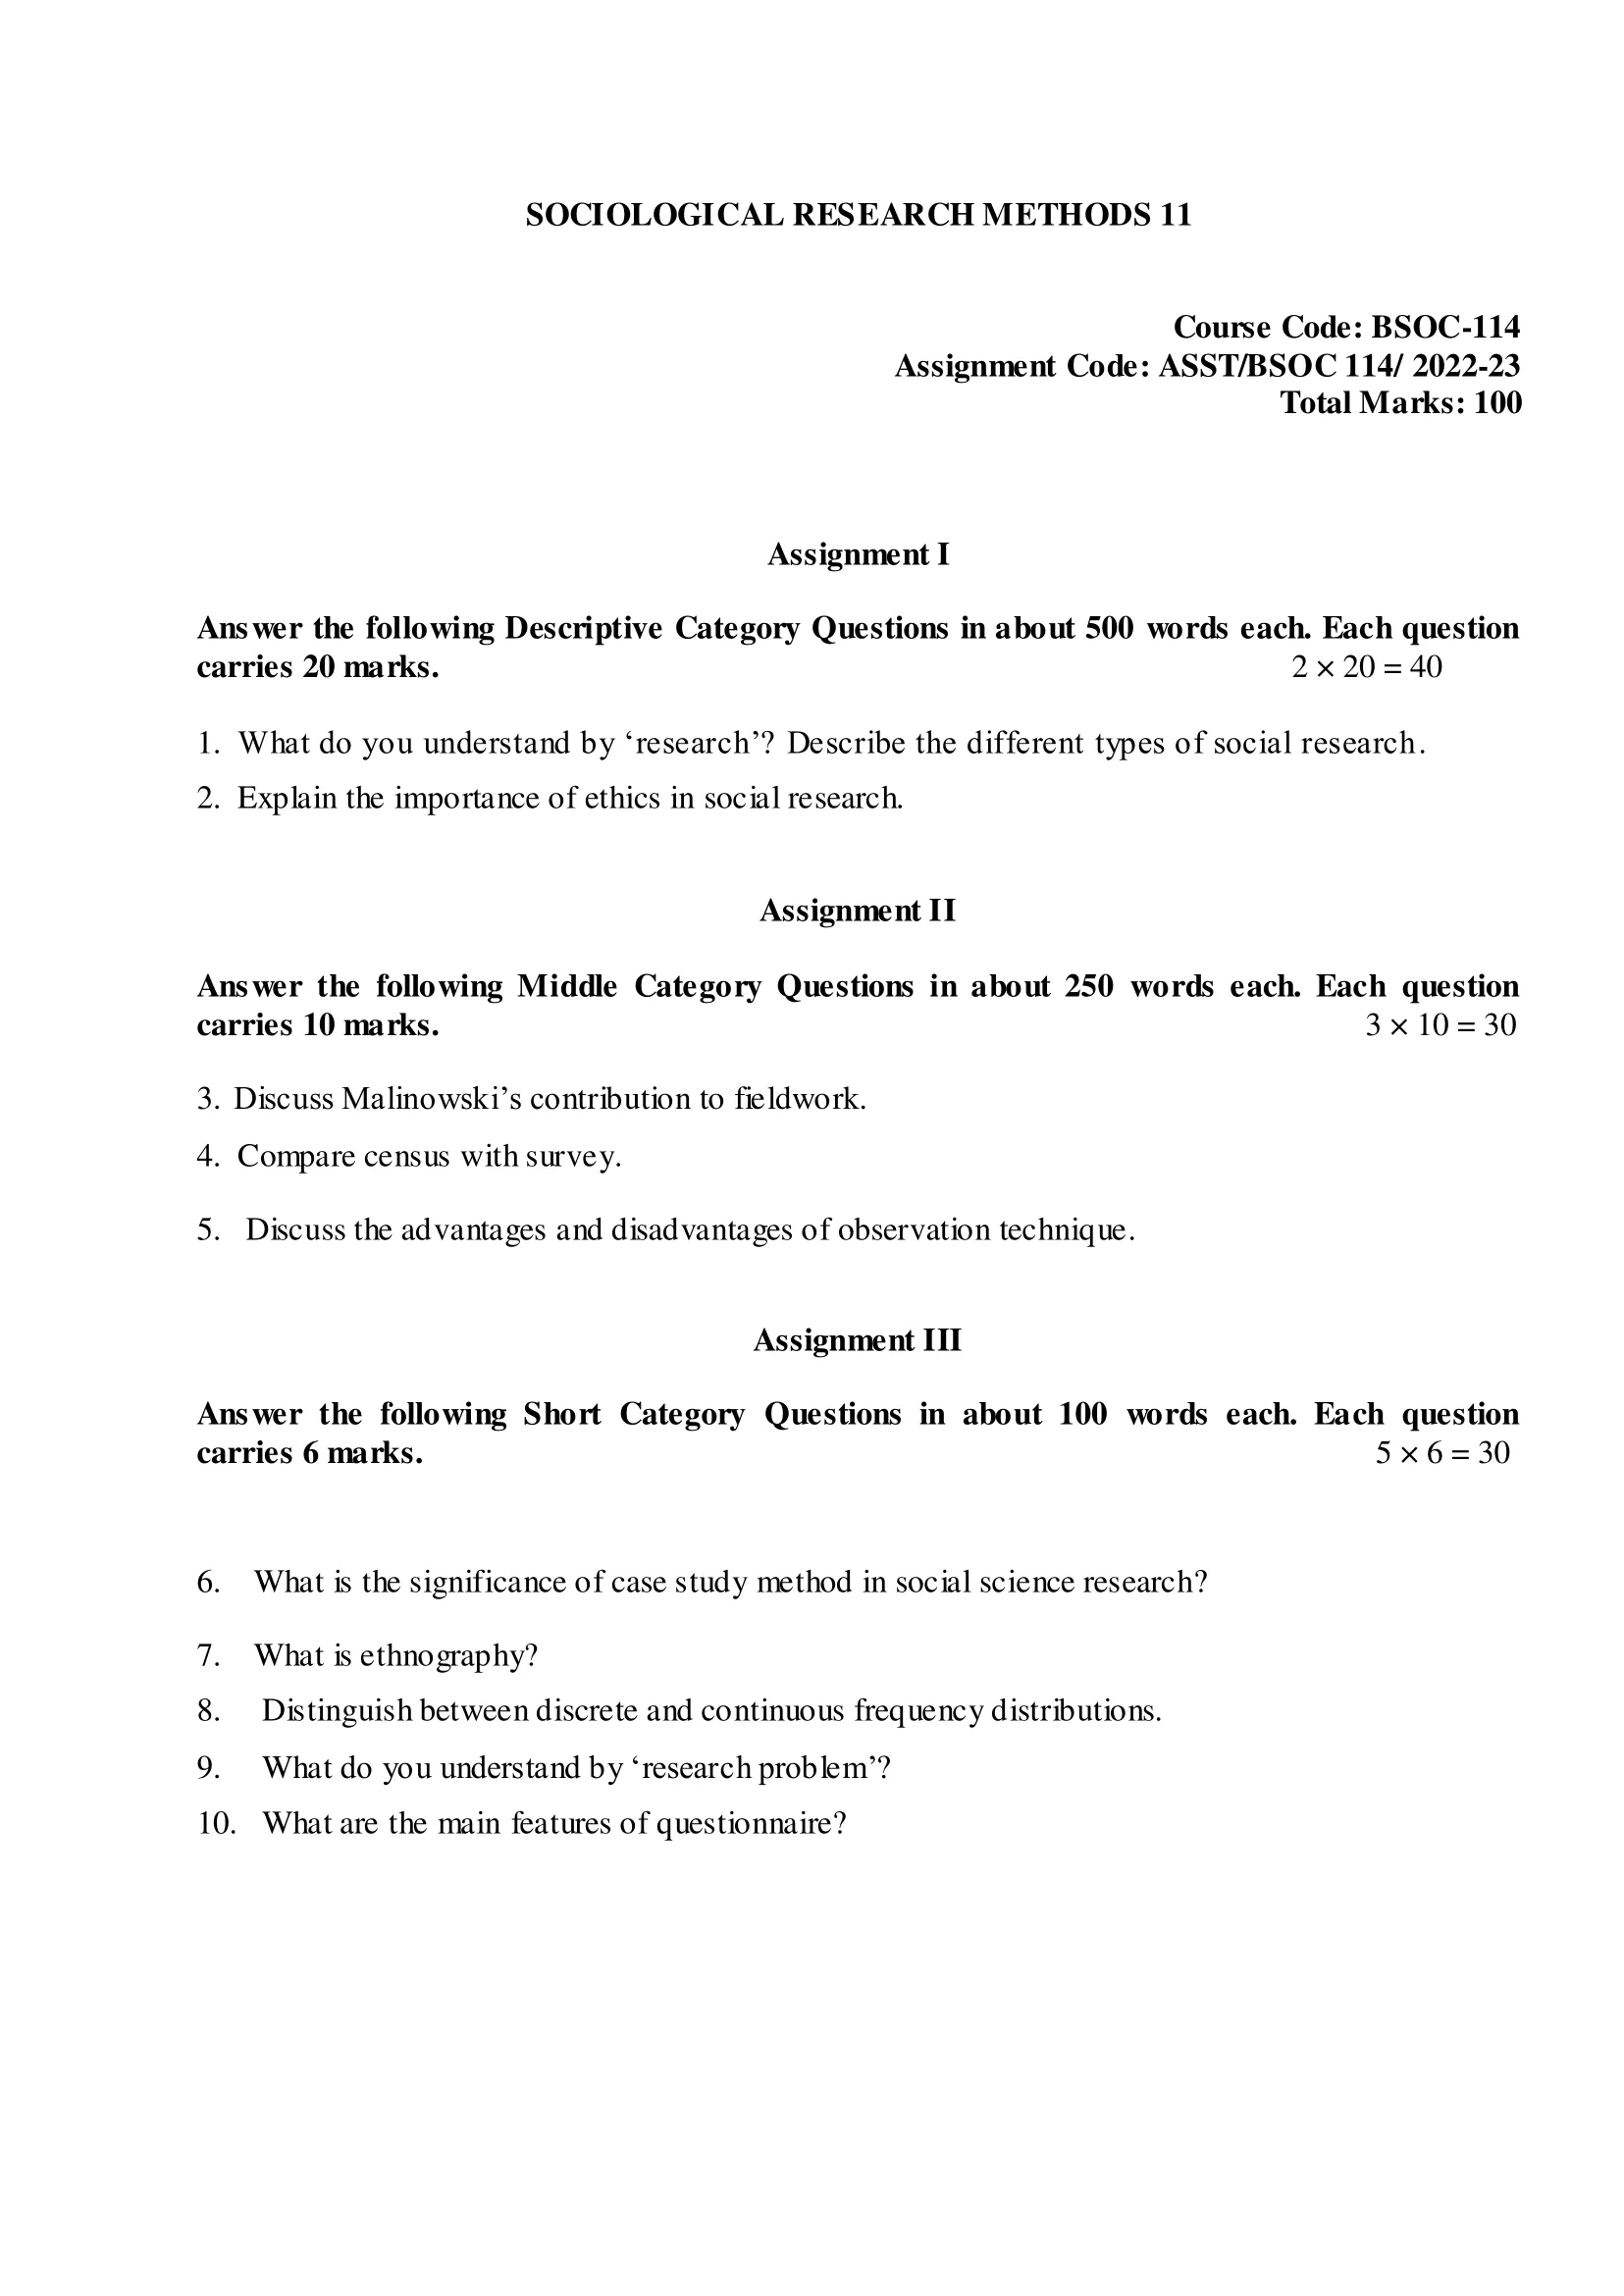 BSOC 114 IGNOU BAG Solved Assignment-SOCIOLOGICAL RESEARCH METHODS-II